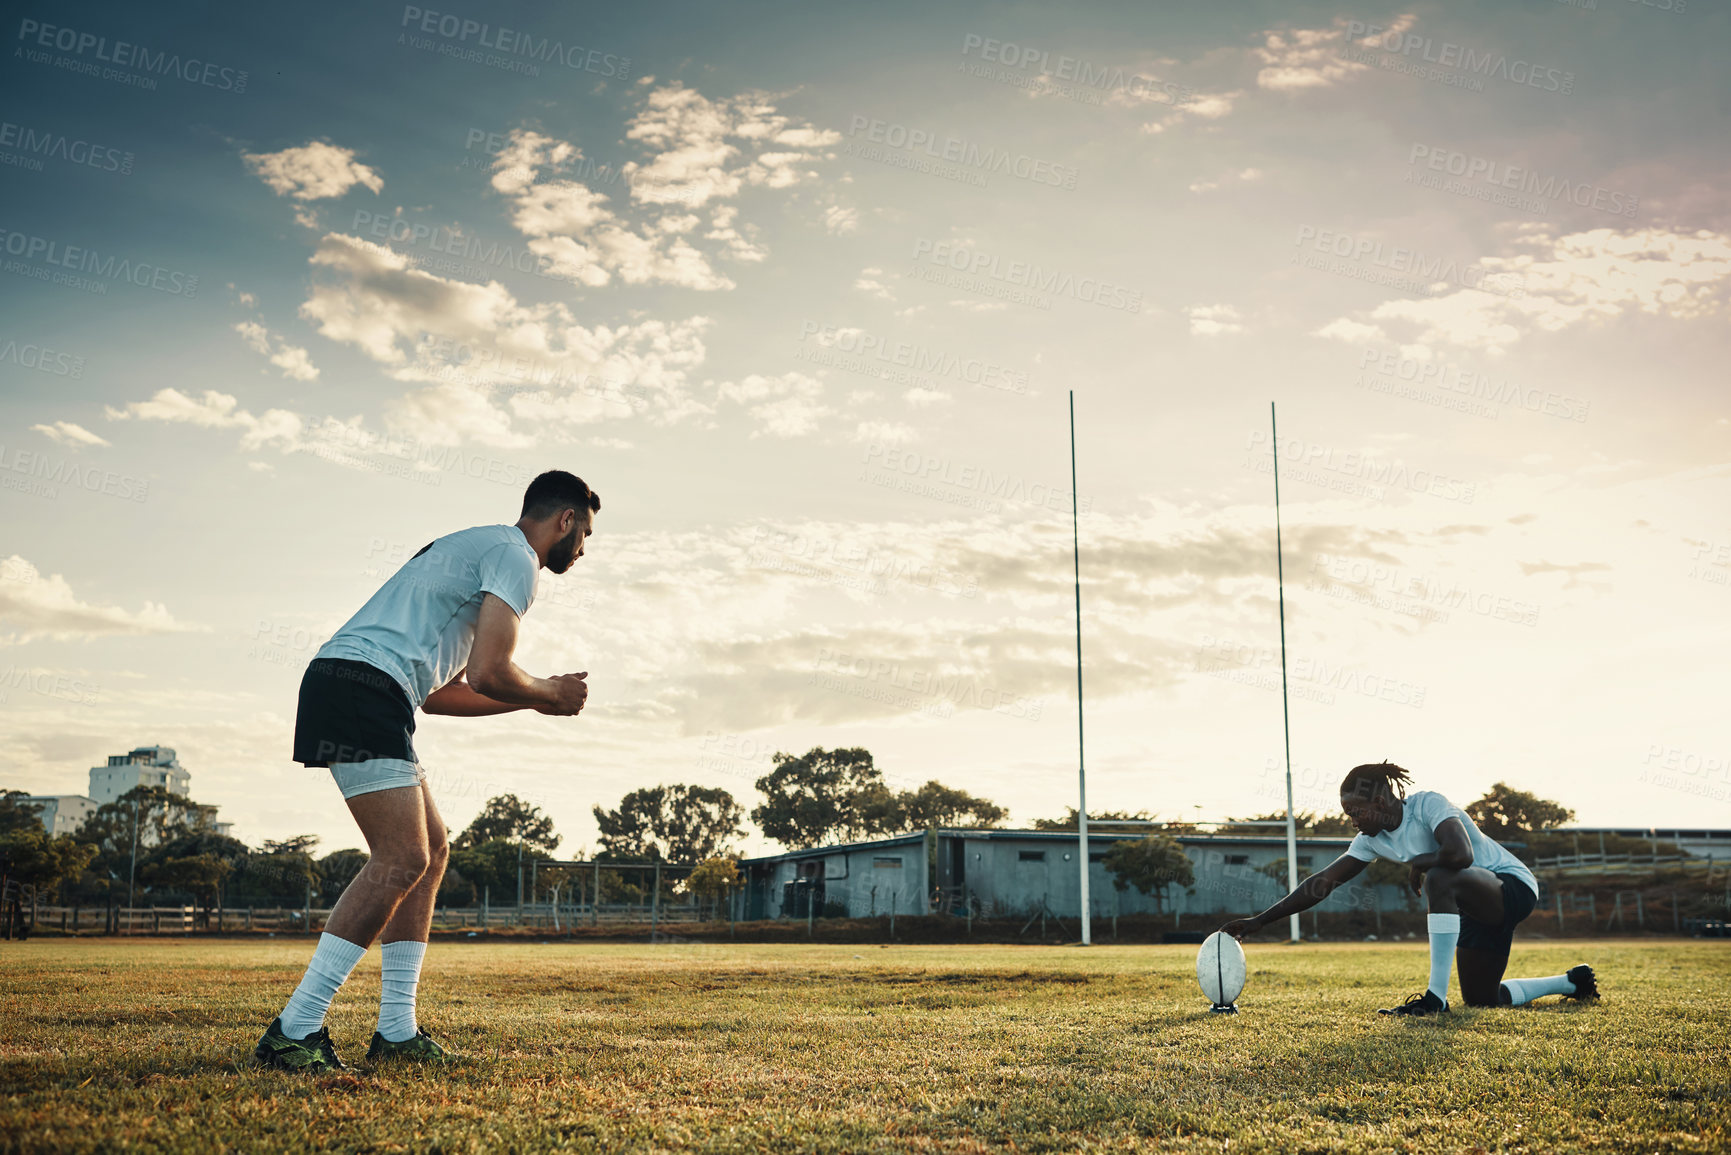 Buy stock photo Full length shot of two young rugby players training together on the field during the day